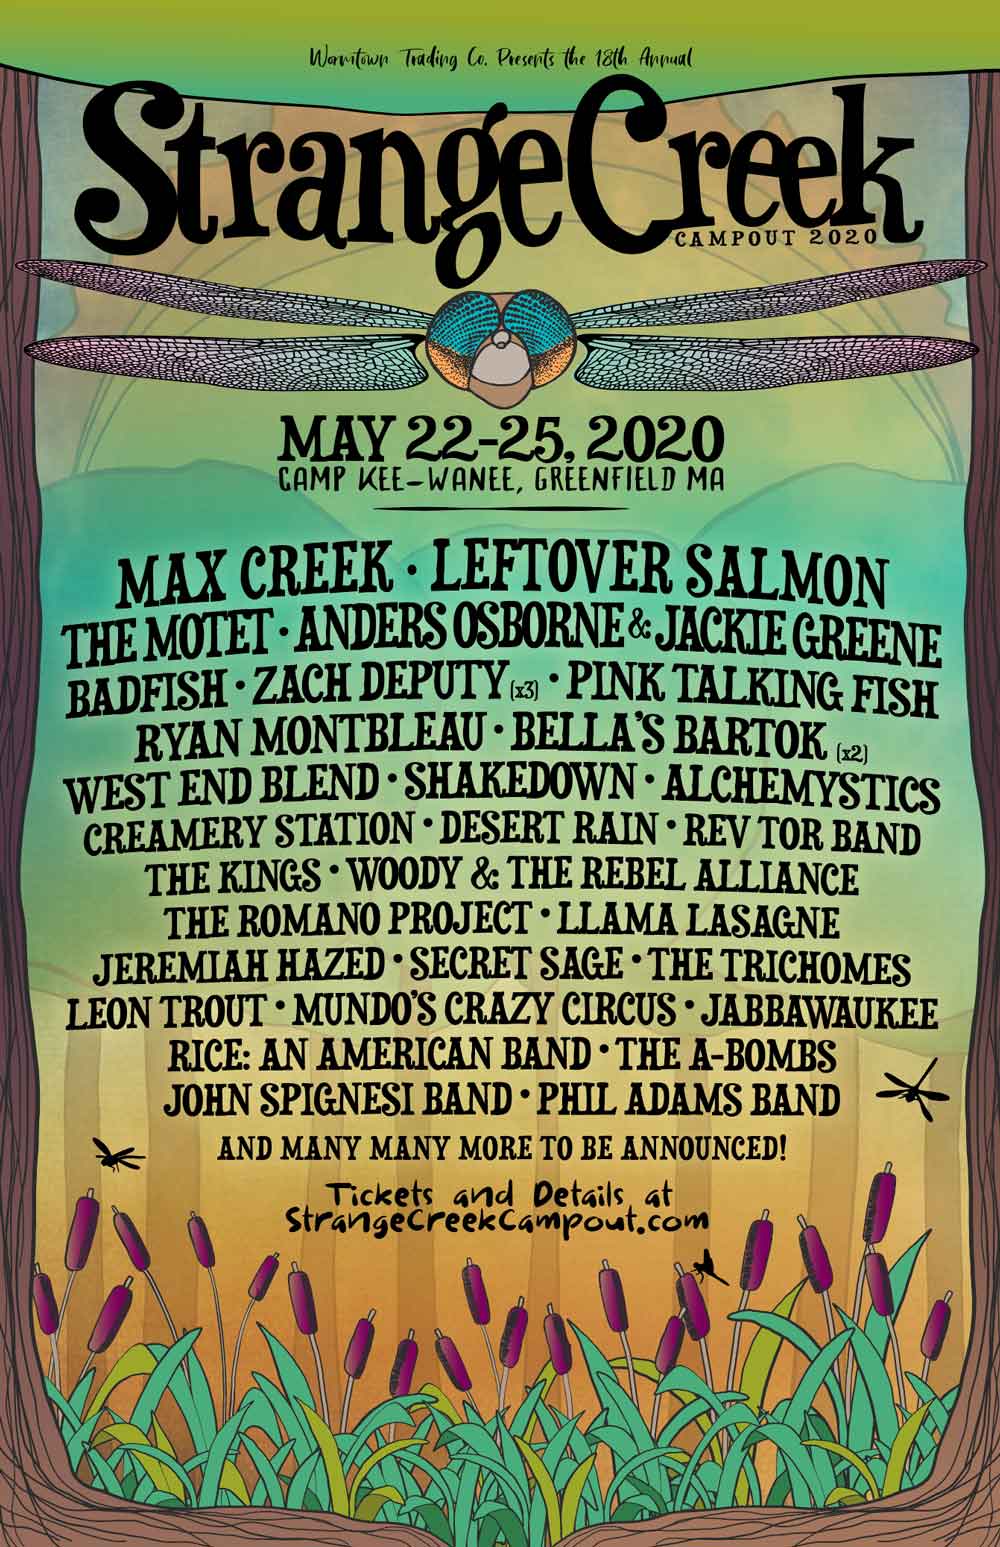 STRANGECREEK 2020 LINEUP ANNOUNCEMENT Wormtown Trading Company